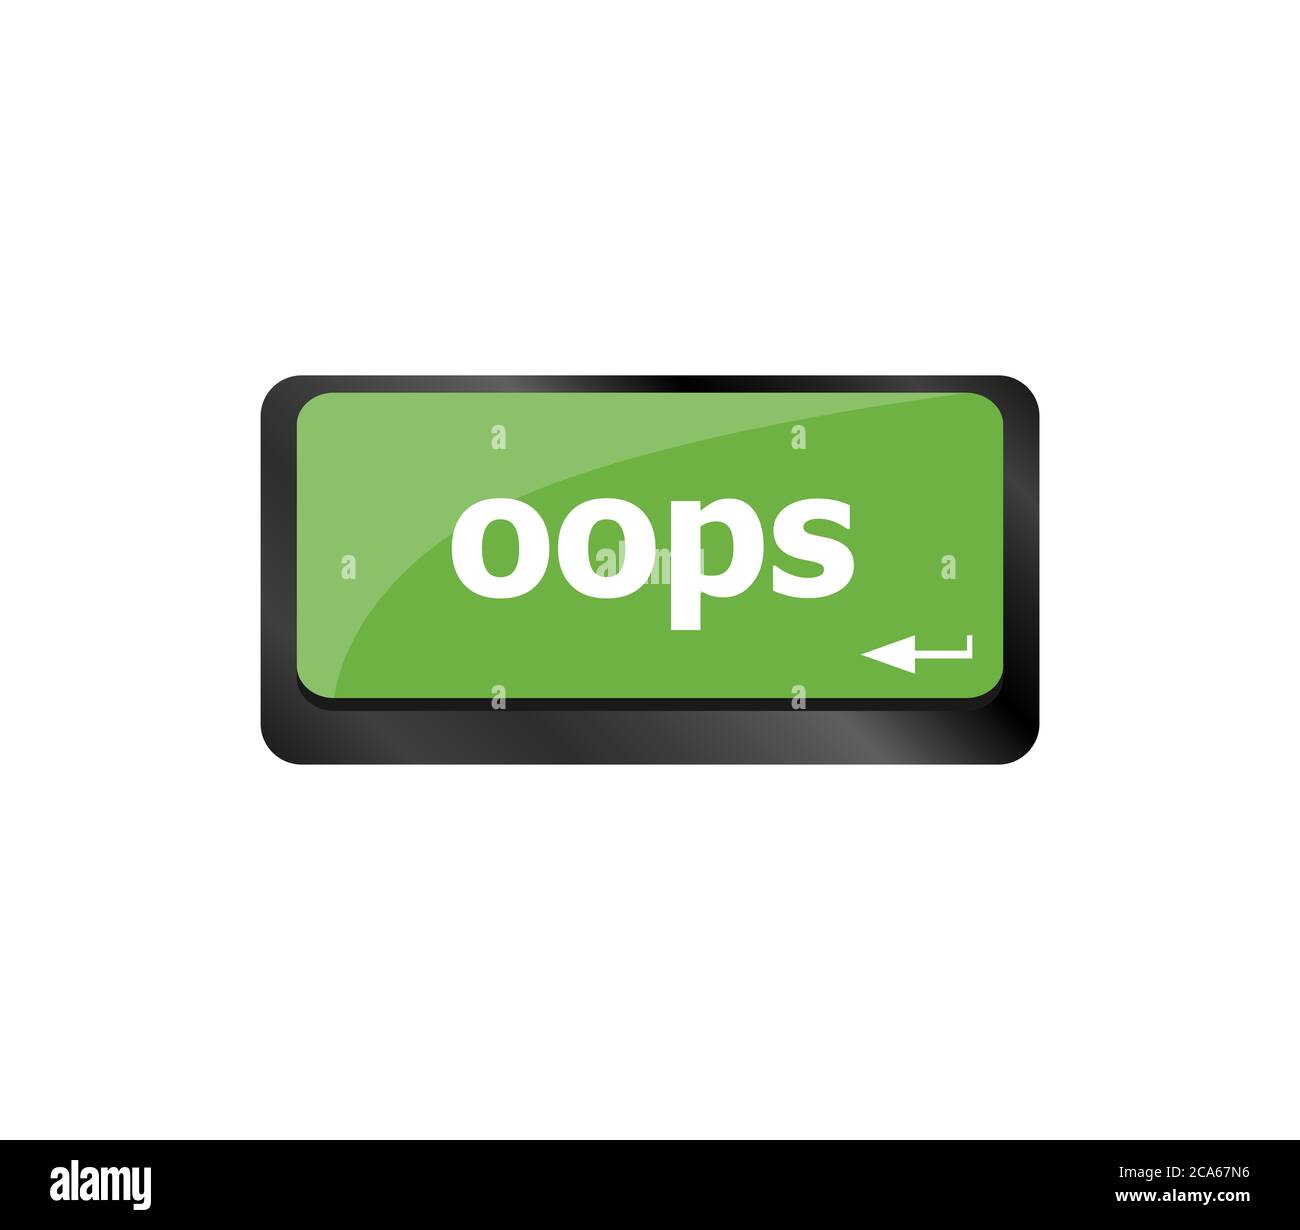 The word oops on a computer keyboard key Stock Photo